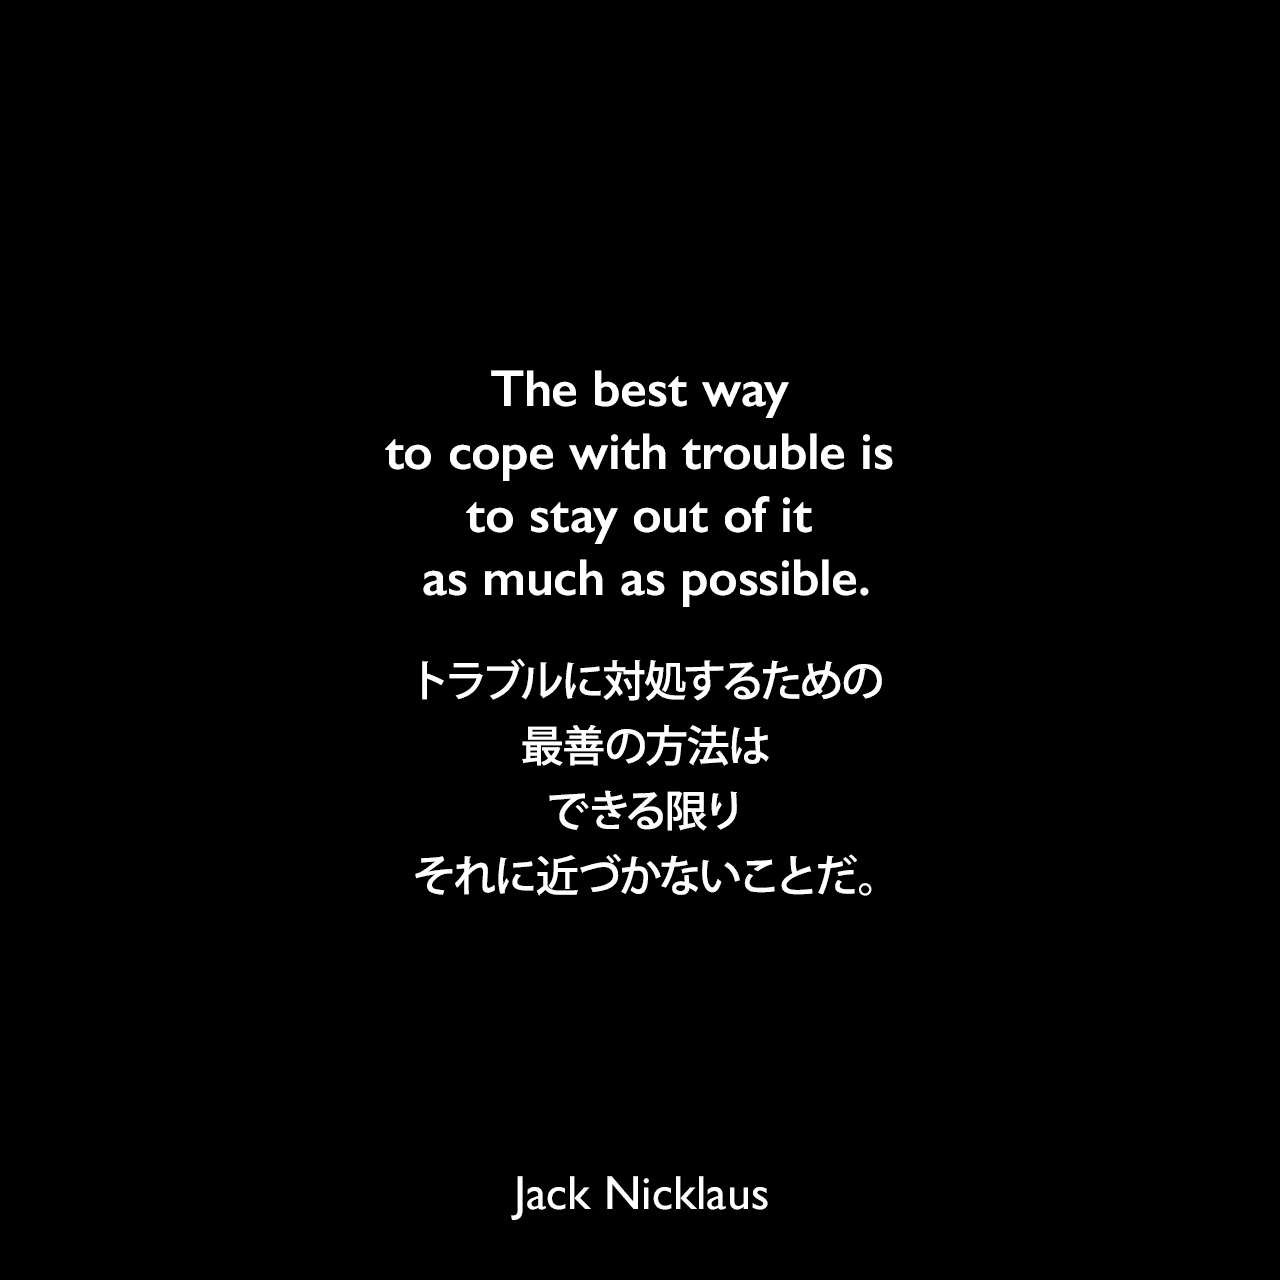 The best way to cope with trouble is to stay out of it as much as possible.トラブルに対処するための最善の方法は、できる限りそれに近づかないことだ。Jack Nicklaus